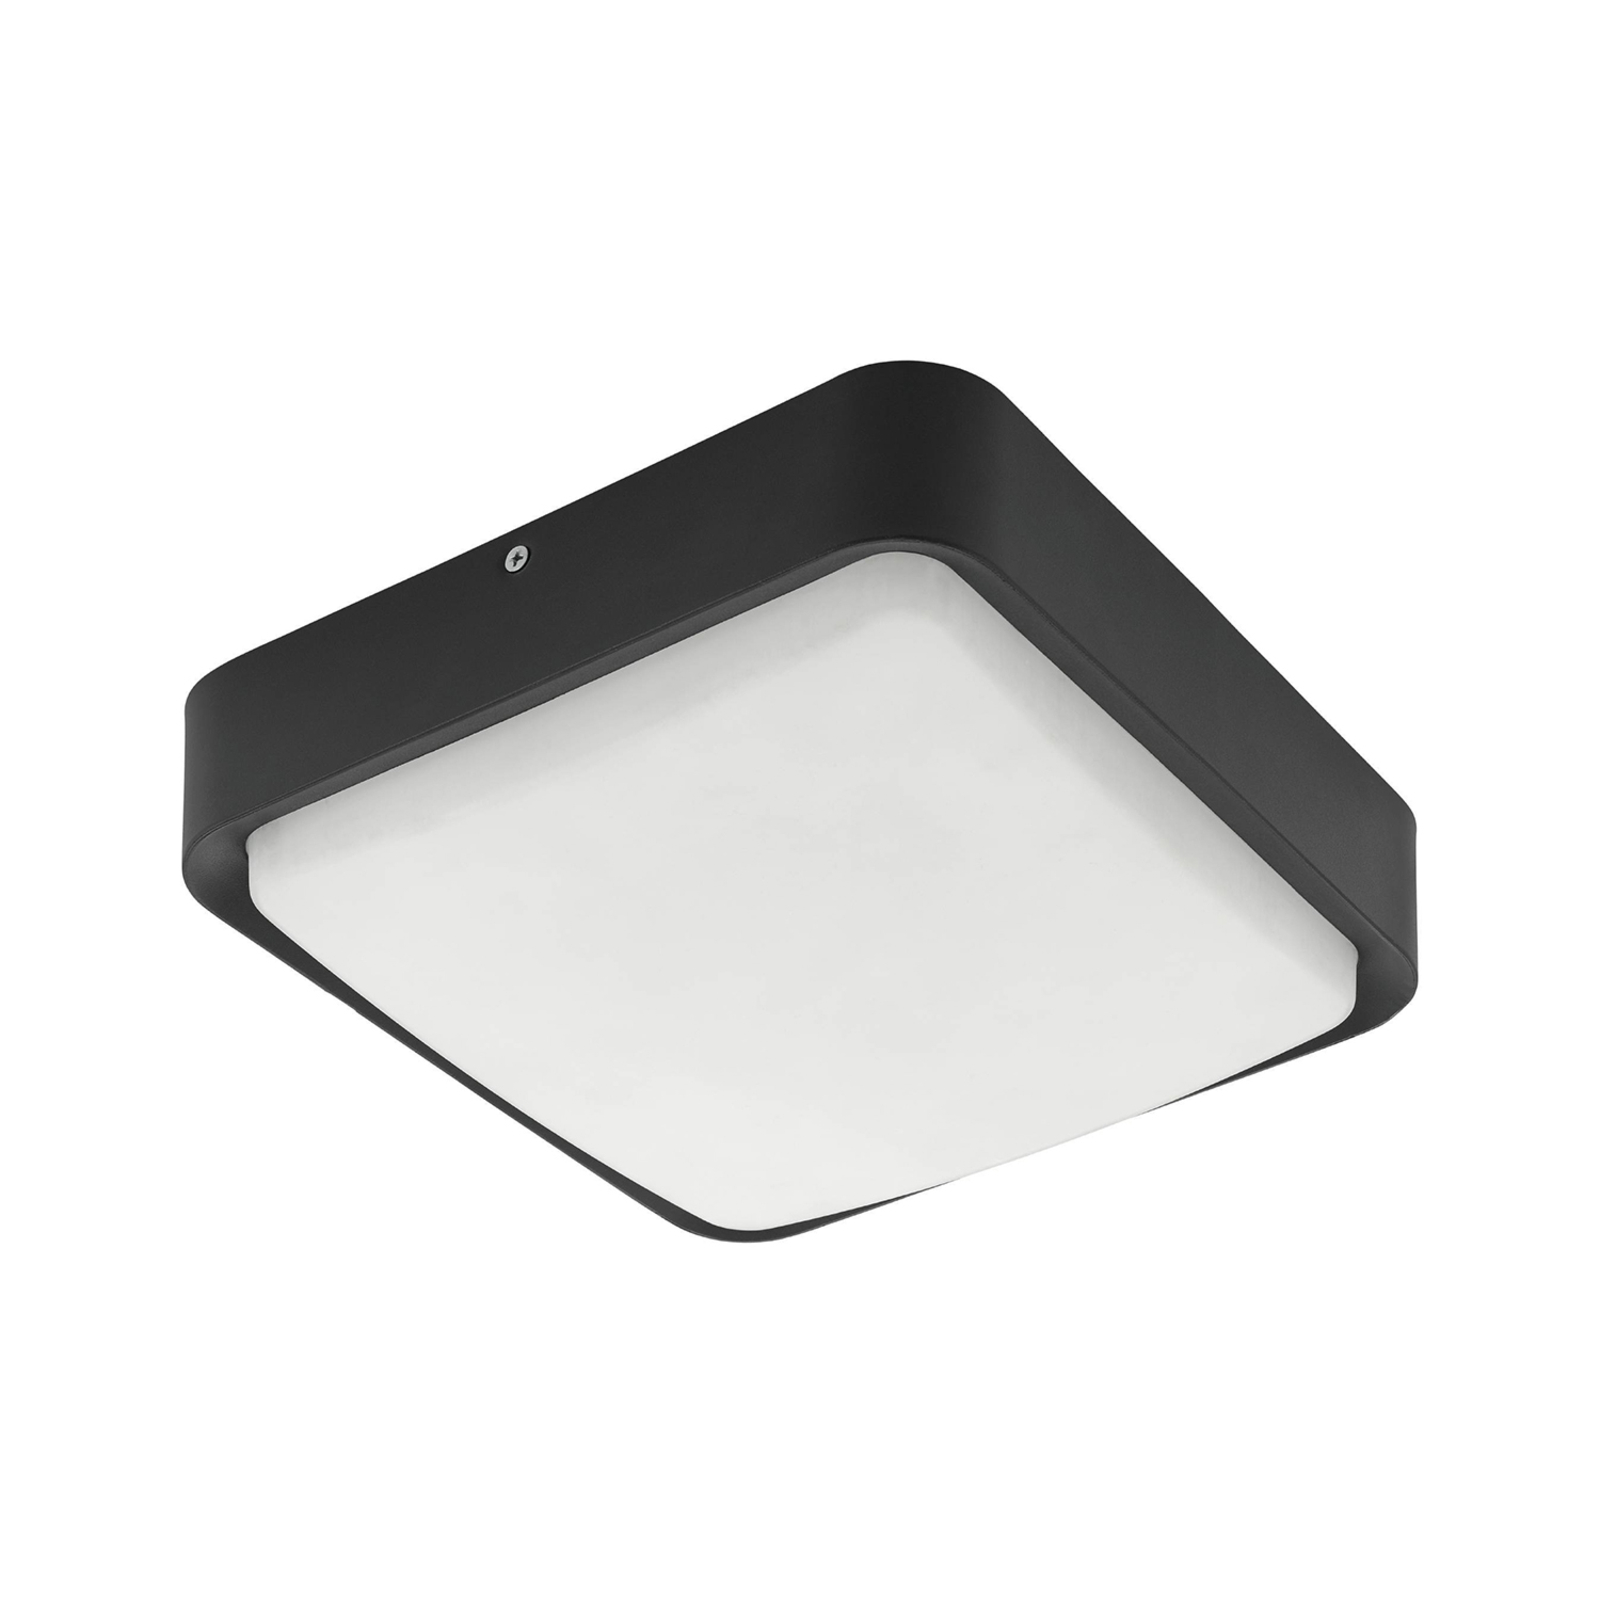 EGLO connect Piove-C LED outdoor wall light